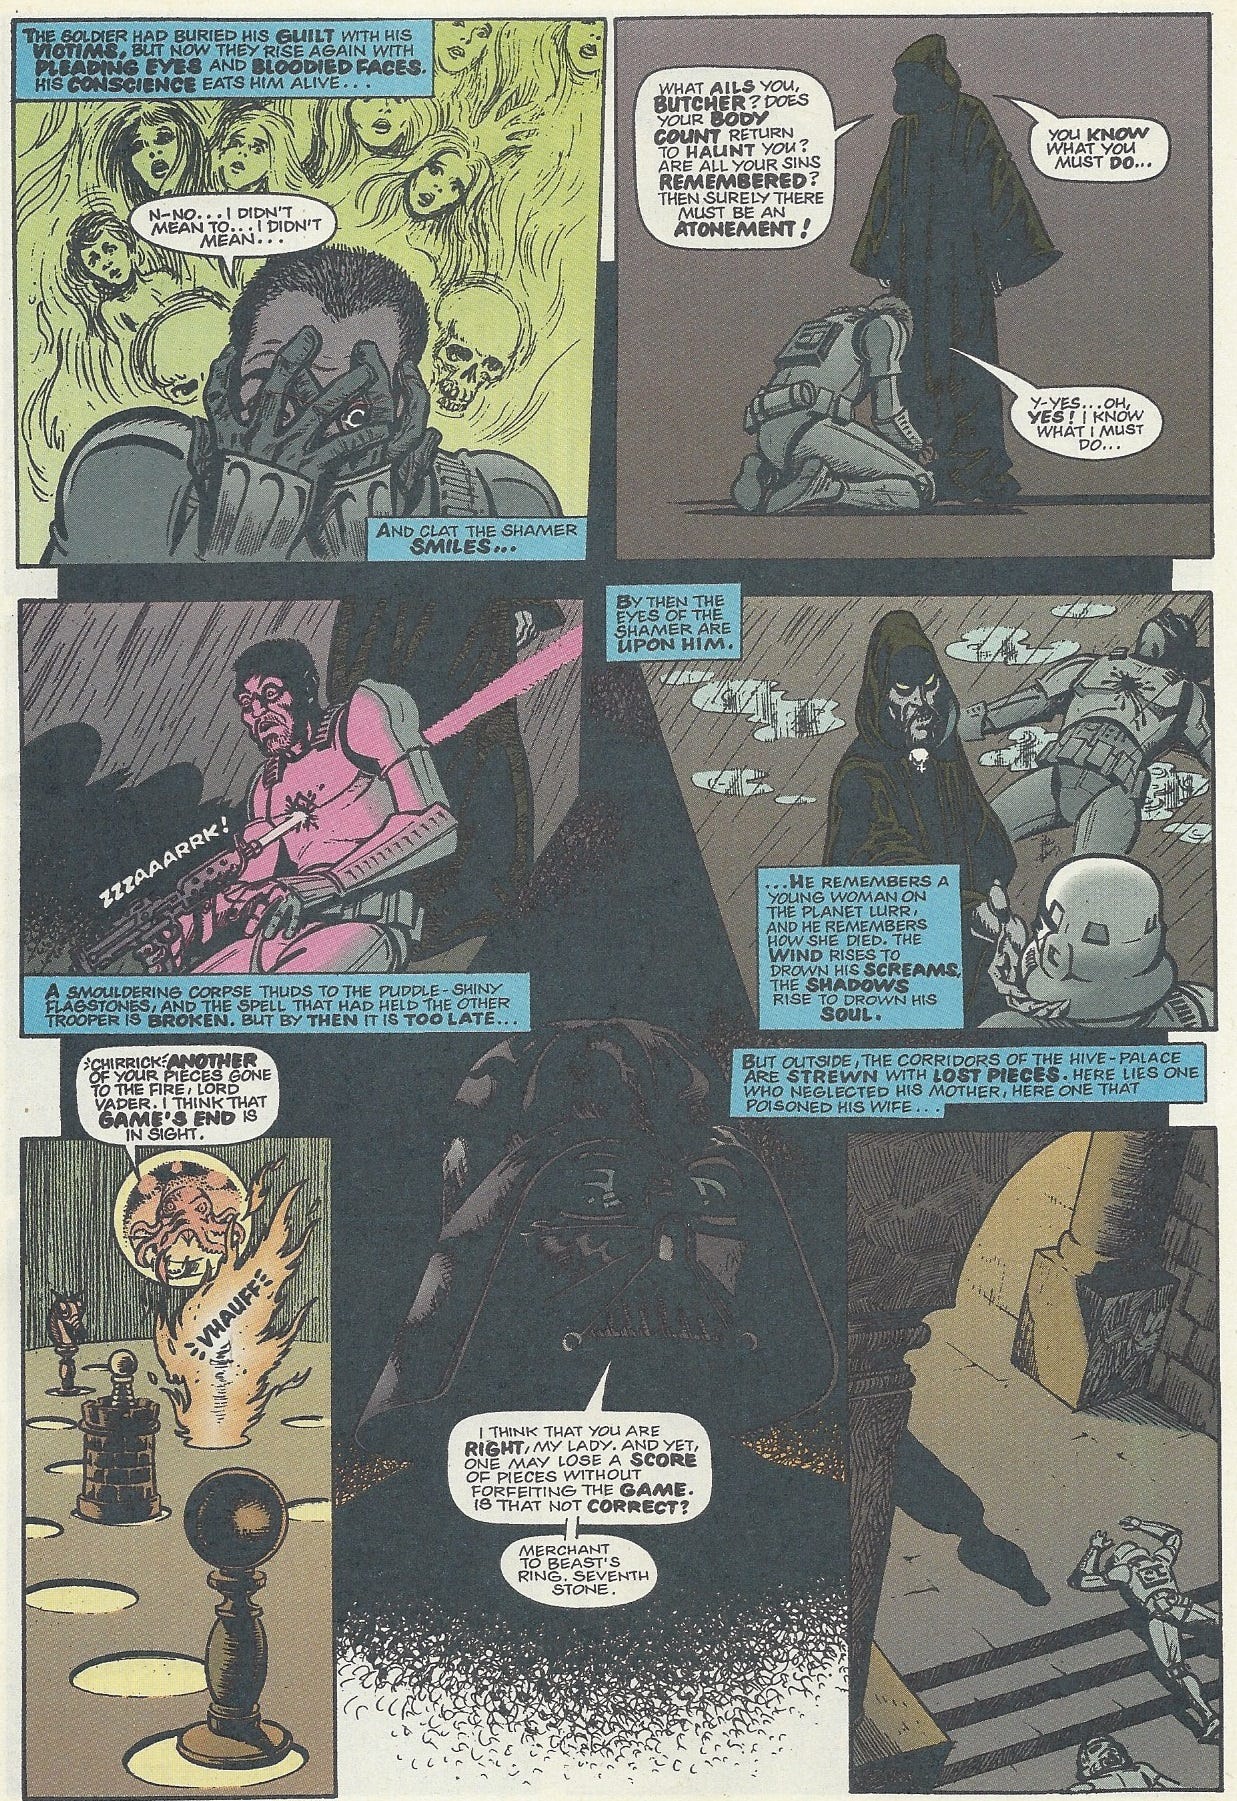 Panel 1: A stormtrooper clutches at his unhelmeted face as the shades of wailing women, children and skulls float behind him.  Narration: the soldier had buried his guilt with his victims, but now they rise again with pleading eyes and bloodied faces. His conscience eats him alive… Stormtrooper: N-No… I didn’t mean to… I didn’t mean… Narration: and Clat the Shamer smiles… Panel 2: The dark green robed Clat stands before the kneeling stormtrooper, his face masked by the shadows of his hood. Clat: What ails you butcher? Does your body count return to haunt you? Are all your sins remembered? Then surely there must be atonement! You know what you must do… Stormtrooper: Y-Yes… Oh yes! I know what I must do… Panel 3: Rain begins to fall. The stormtrooper looks down as he fires his blaster at his own chest. A pink beam pierces through him with a zzzaaarrrk! Sound effect. He looks at the act with surprise, as if someone else is pulling the trigger. Clat watches this unfold. Narration: A smouldering corpse thuds to the puddle-shiny flagstones, and the spell that had held the other trooper is broken. But by then it is too late… Panel 4: The stormtrooper lies dead, as Clat cradles his surviving ally’s face. Clat’s skull necklace and face are now visible. He has yellow eyes and grey skin, with a black mustache.  Narration: by the the eyes of the shamer are upon him. …He remembers a young woman on the planet Lurr, and he remembers how she died. The wind rises to drown his screams, the shadows rise to drown his soul. Panel 5: An alien octopus in a hovering glass sphere surveys a giant, chess like game. A piece is destroyed in a burst of flame (Vhauff). Octopus: Chirrick. Another of your pieces gone to the fire, Lord Vader. I think that game’s end is in sight. Panel 6: The imposing black mask of Darth Vader. Darth Vader: I think that you are right, my lady. And yet, one may lose a score of pieces without forfeiting the game. Is that not correct? Merchant to beast’s ring. Seventh stone. Panel 7: Clat’s shadow is visible in these stone halls, two dead stormtroopers strewn behind him. Narration: but outside, the corridors of the hive-palace are strewn with lost pieces. Here lies one who neglected his mother, here one that poisoned his wife…